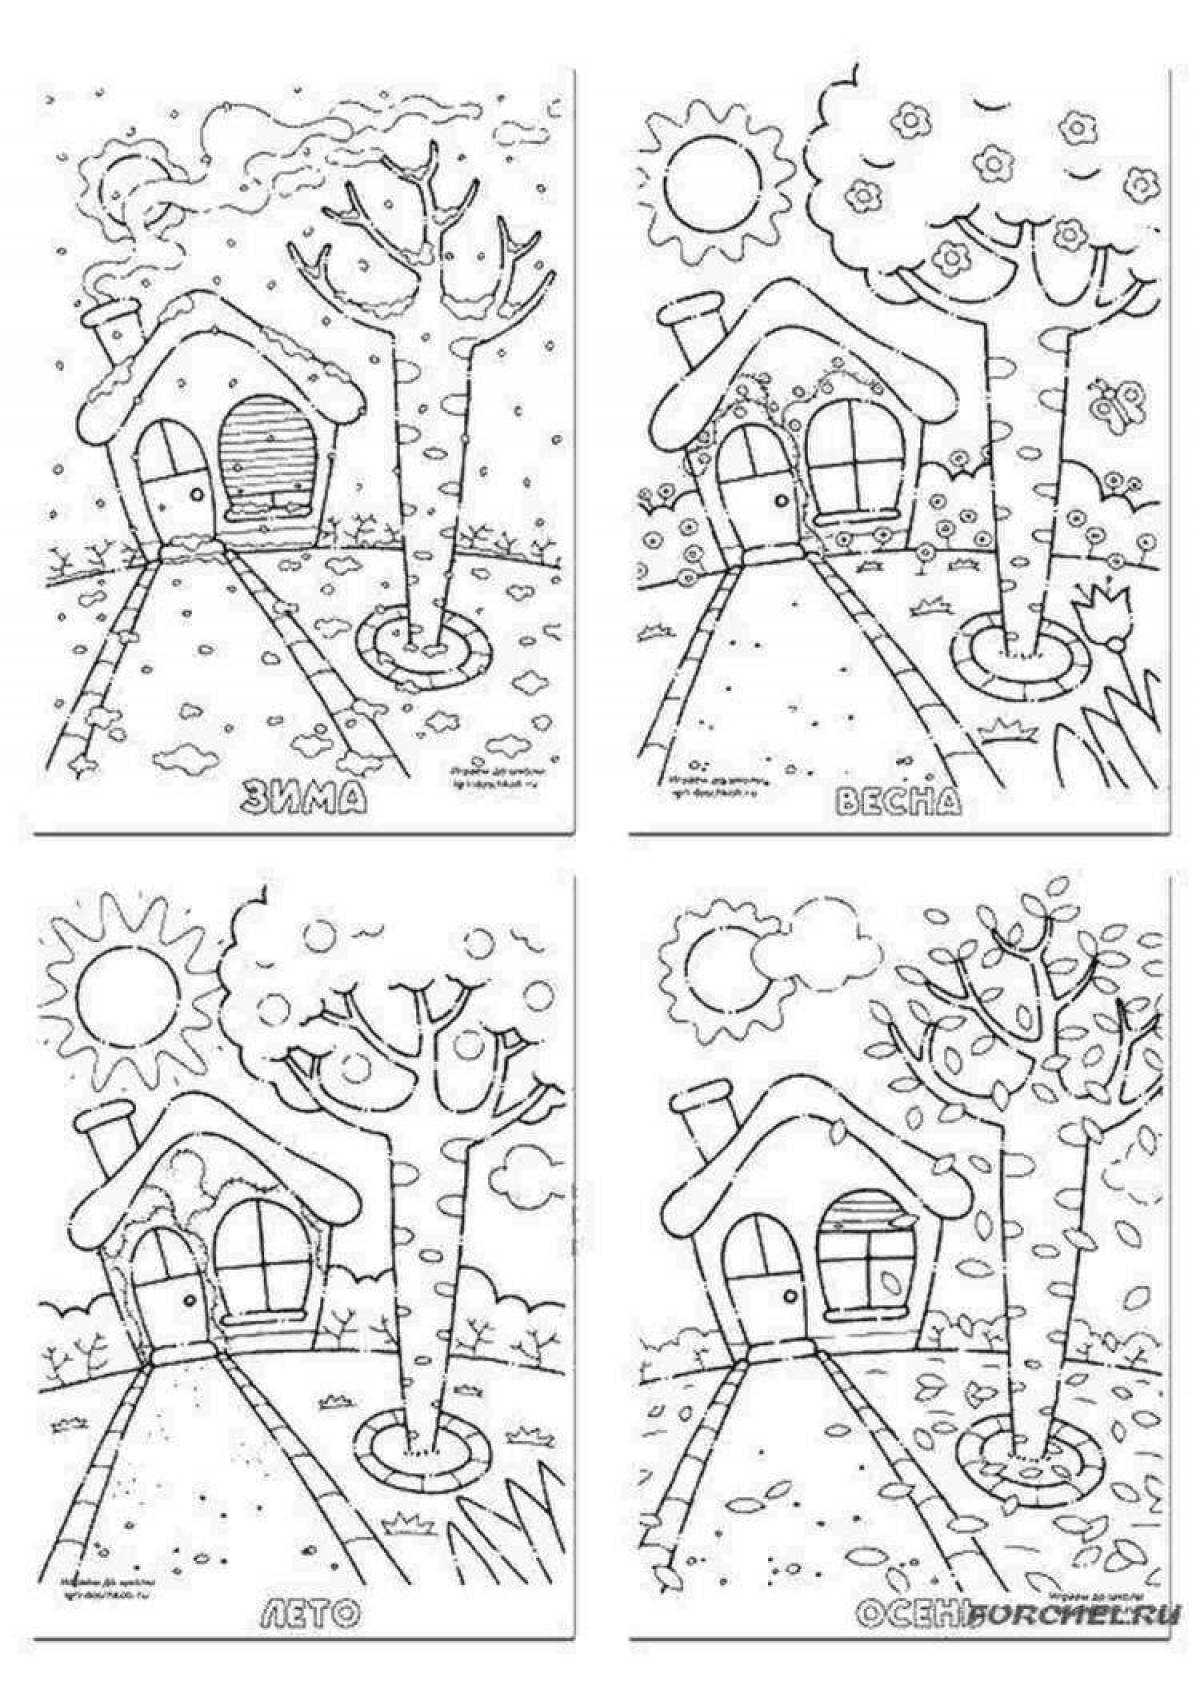 A fascinating coloring book signs of winter for children